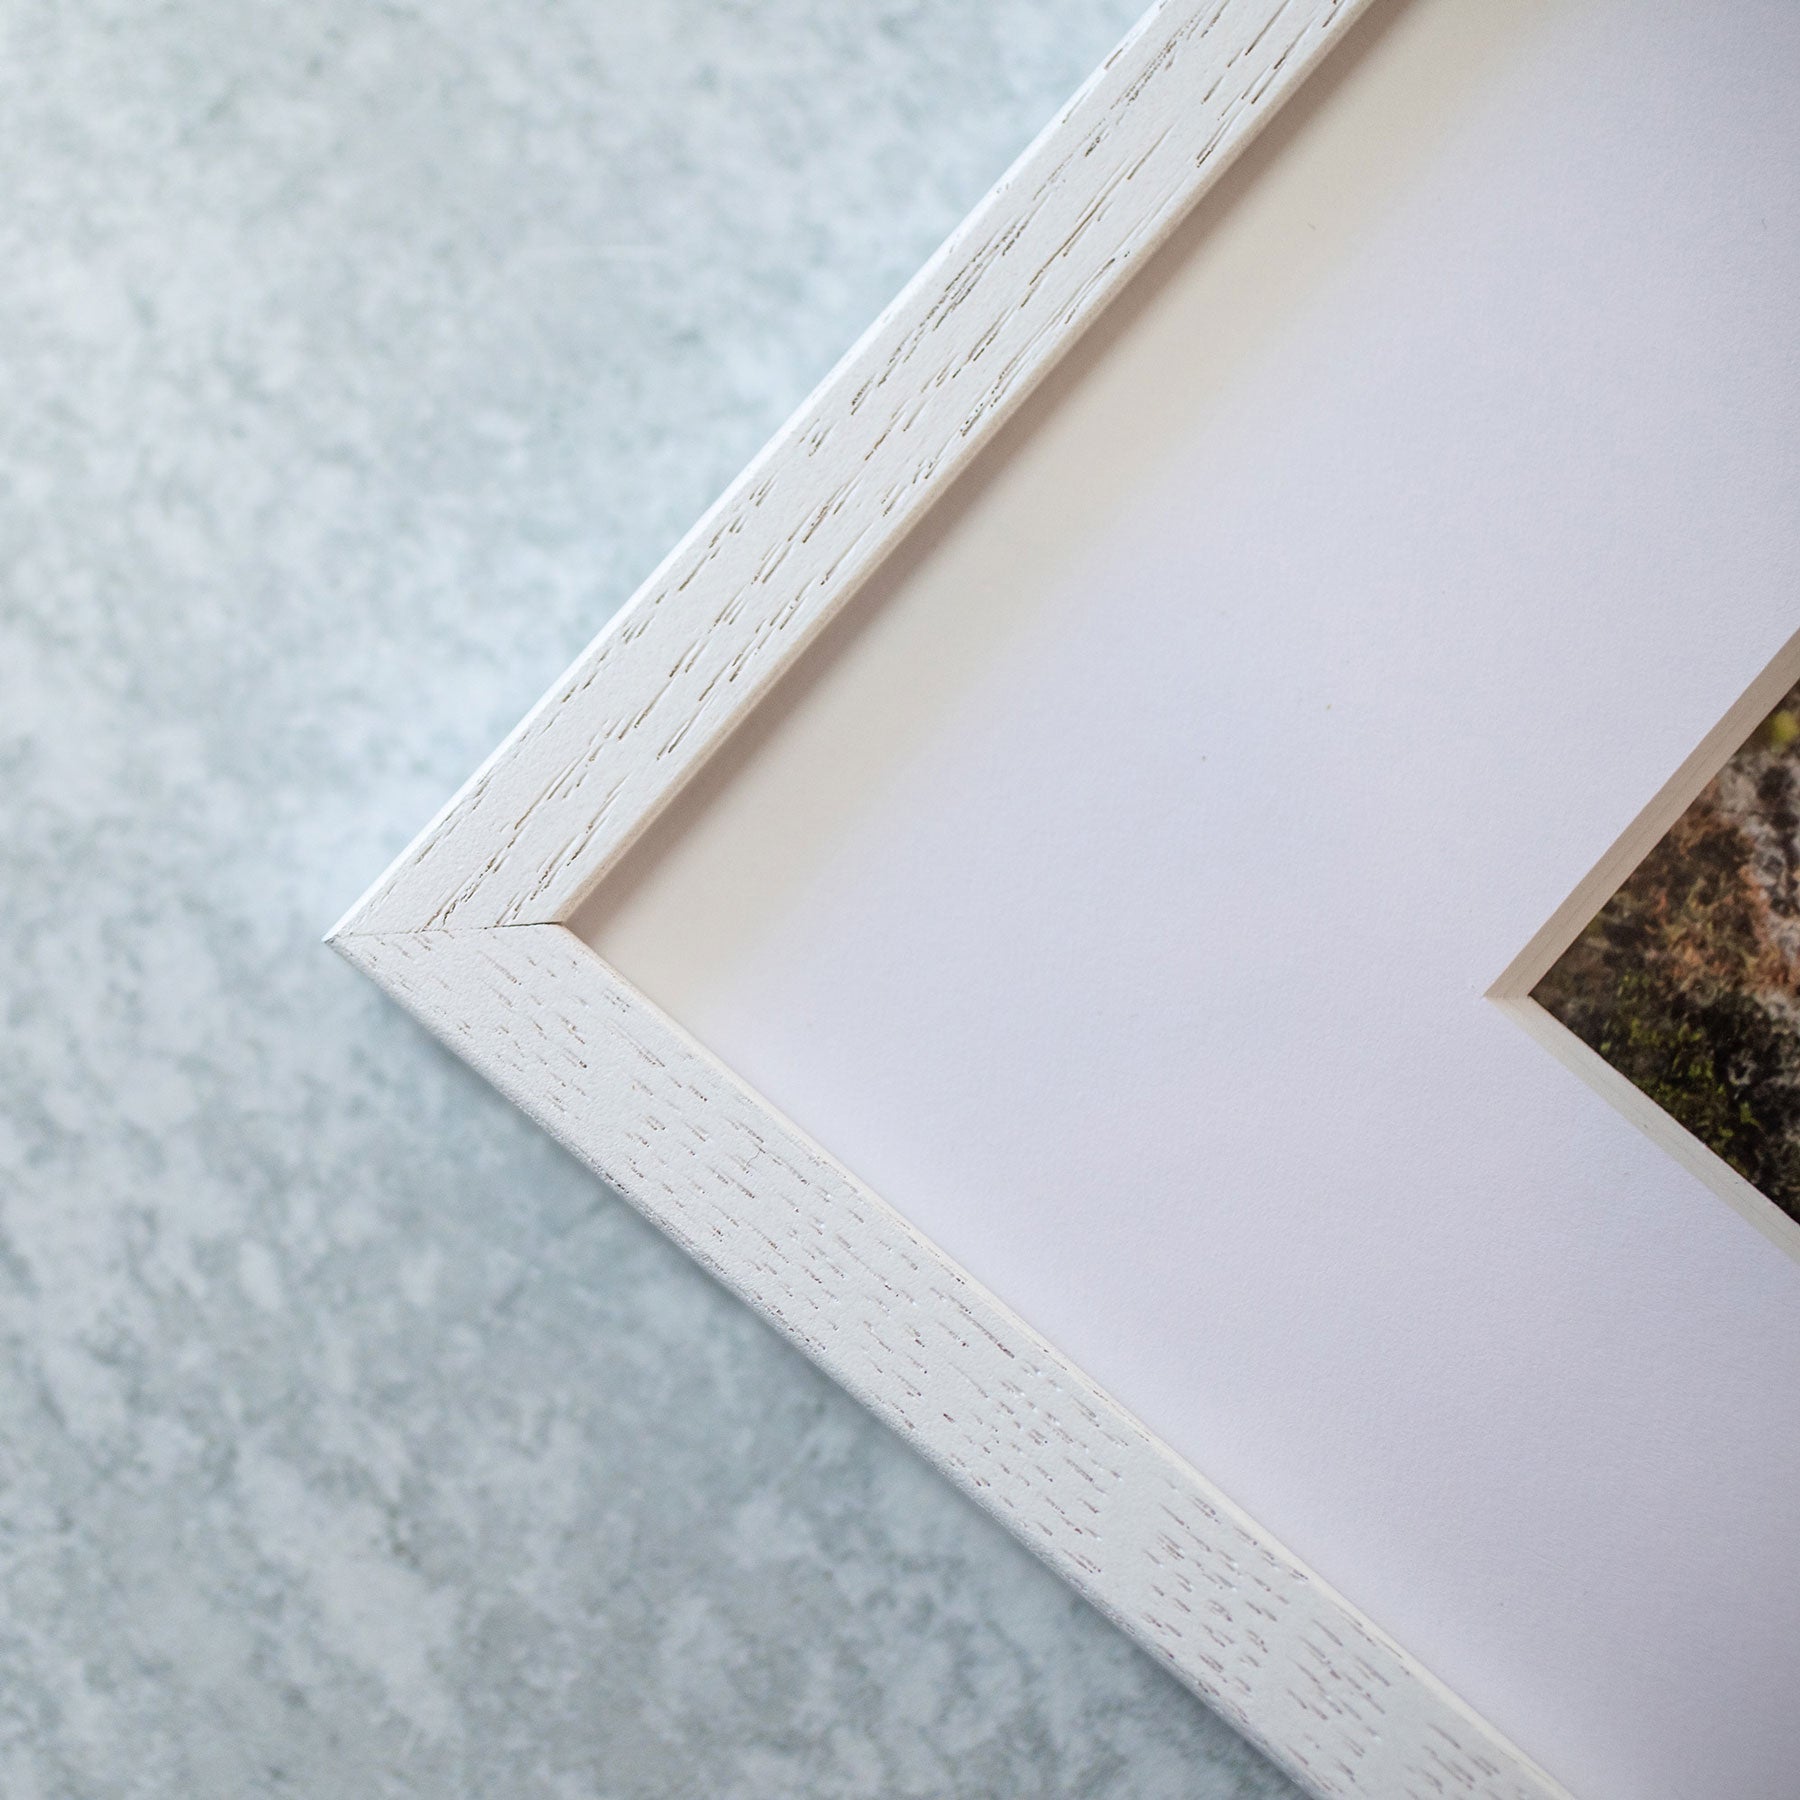 Close-up view of a corner of a white distressed wooden picture frame on a pale grey textured surface, partially displaying a mounted Pink Rose Print on archival photographic paper by Offley Green.